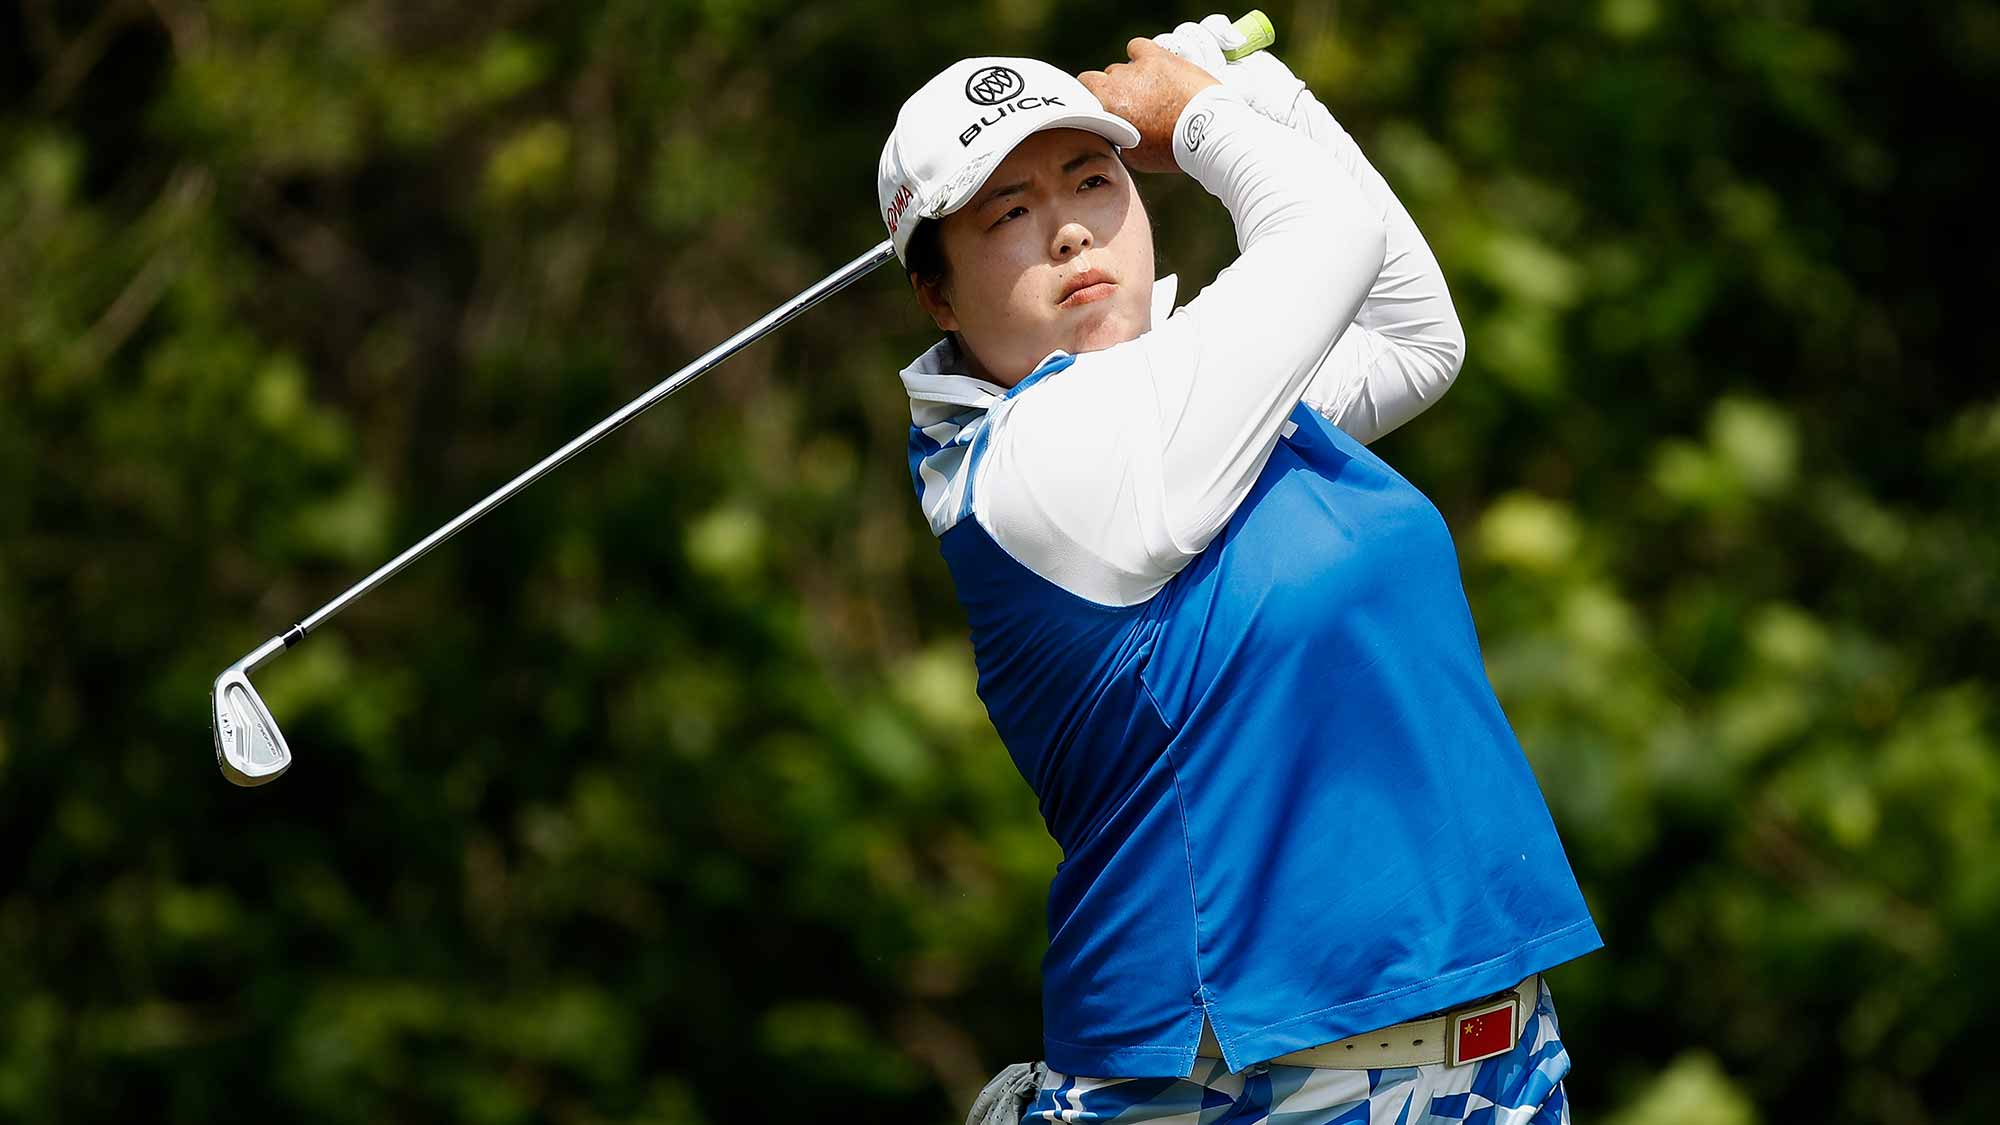 Shanshan Feng of China watches her tee shot on the seventh hole during the final round of the LPGA Volvik Championship on May 28, 2017 at Travis Pointe Country Club Ann Arbor, Michigan